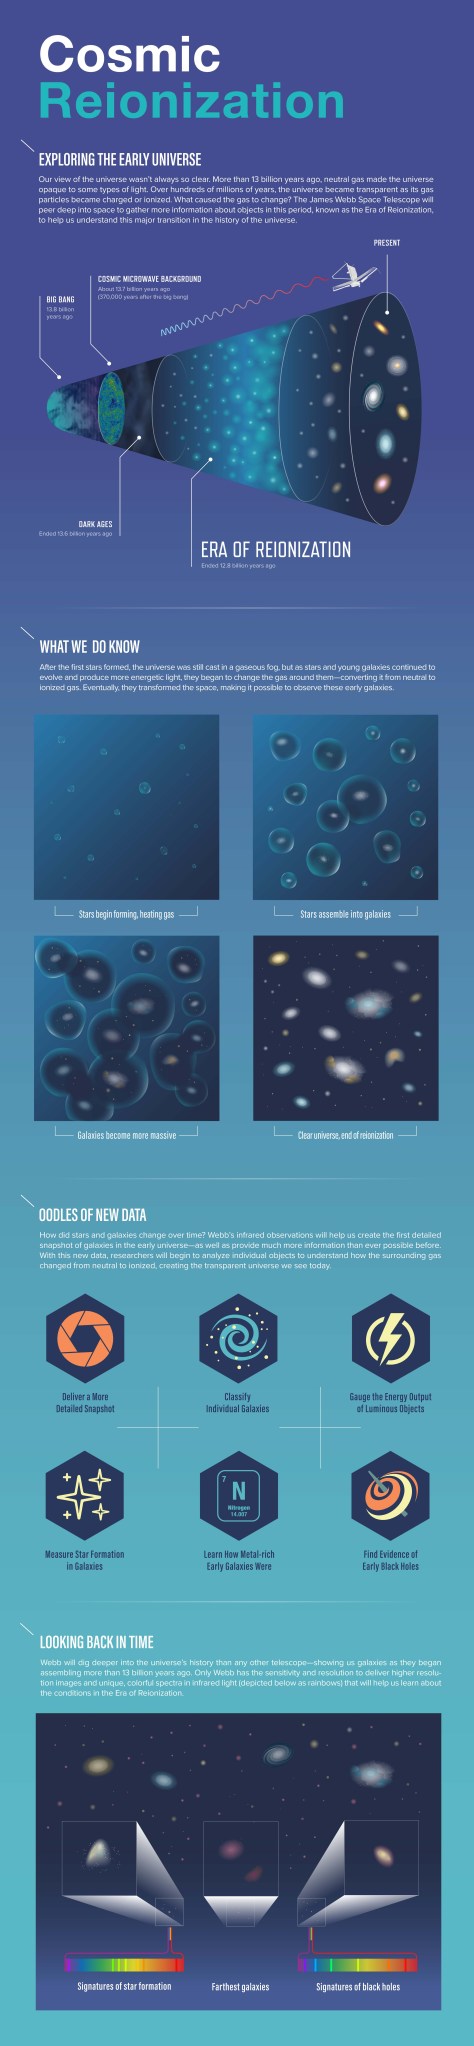 Infographic about the Era of Reionization